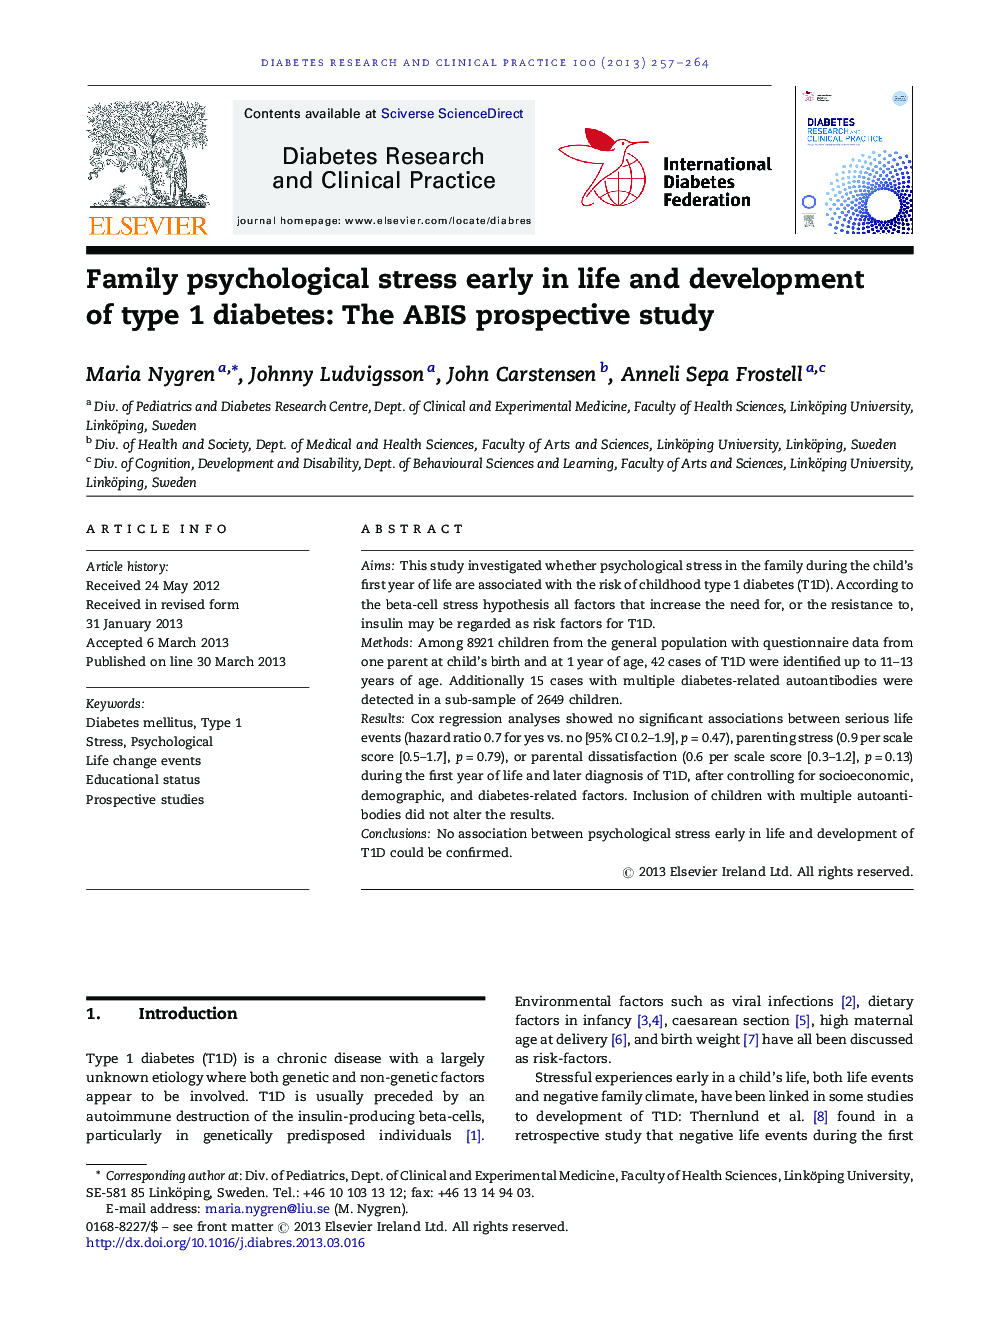 Family psychological stress early in life and development of type 1 diabetes: The ABIS prospective study